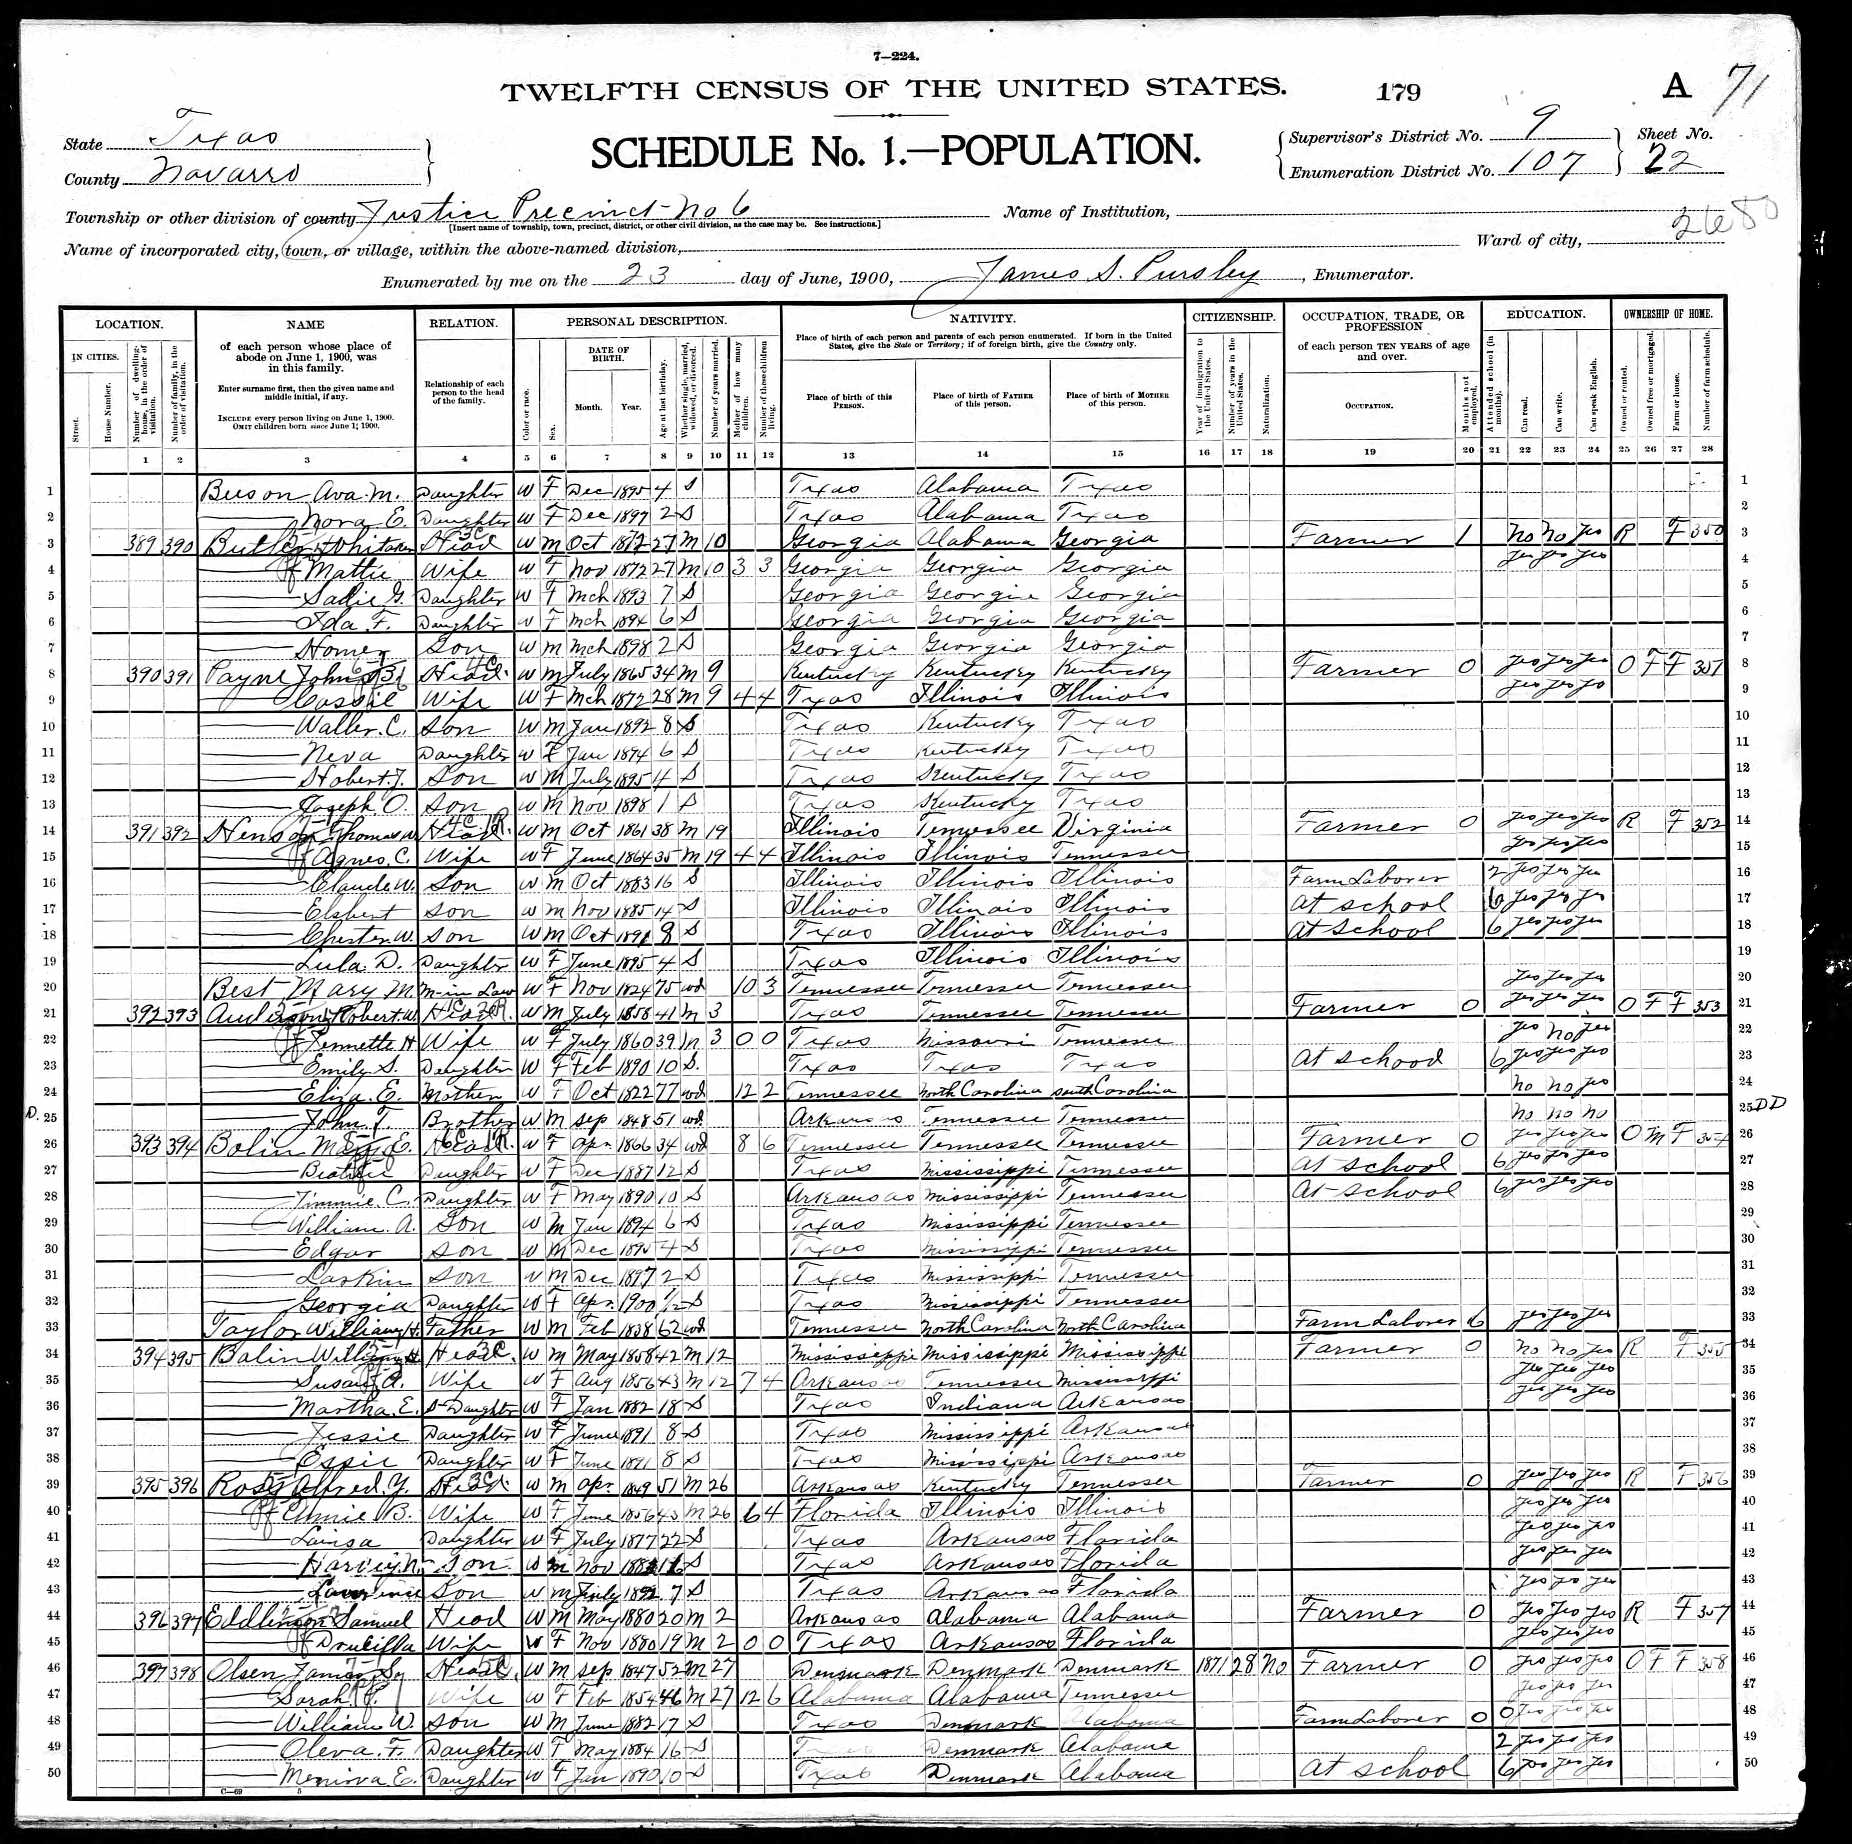 Mary M. (Walker) Best, 1900 Navarro County, Texas, census; daughter of Jacob Walker and Agnes McLean